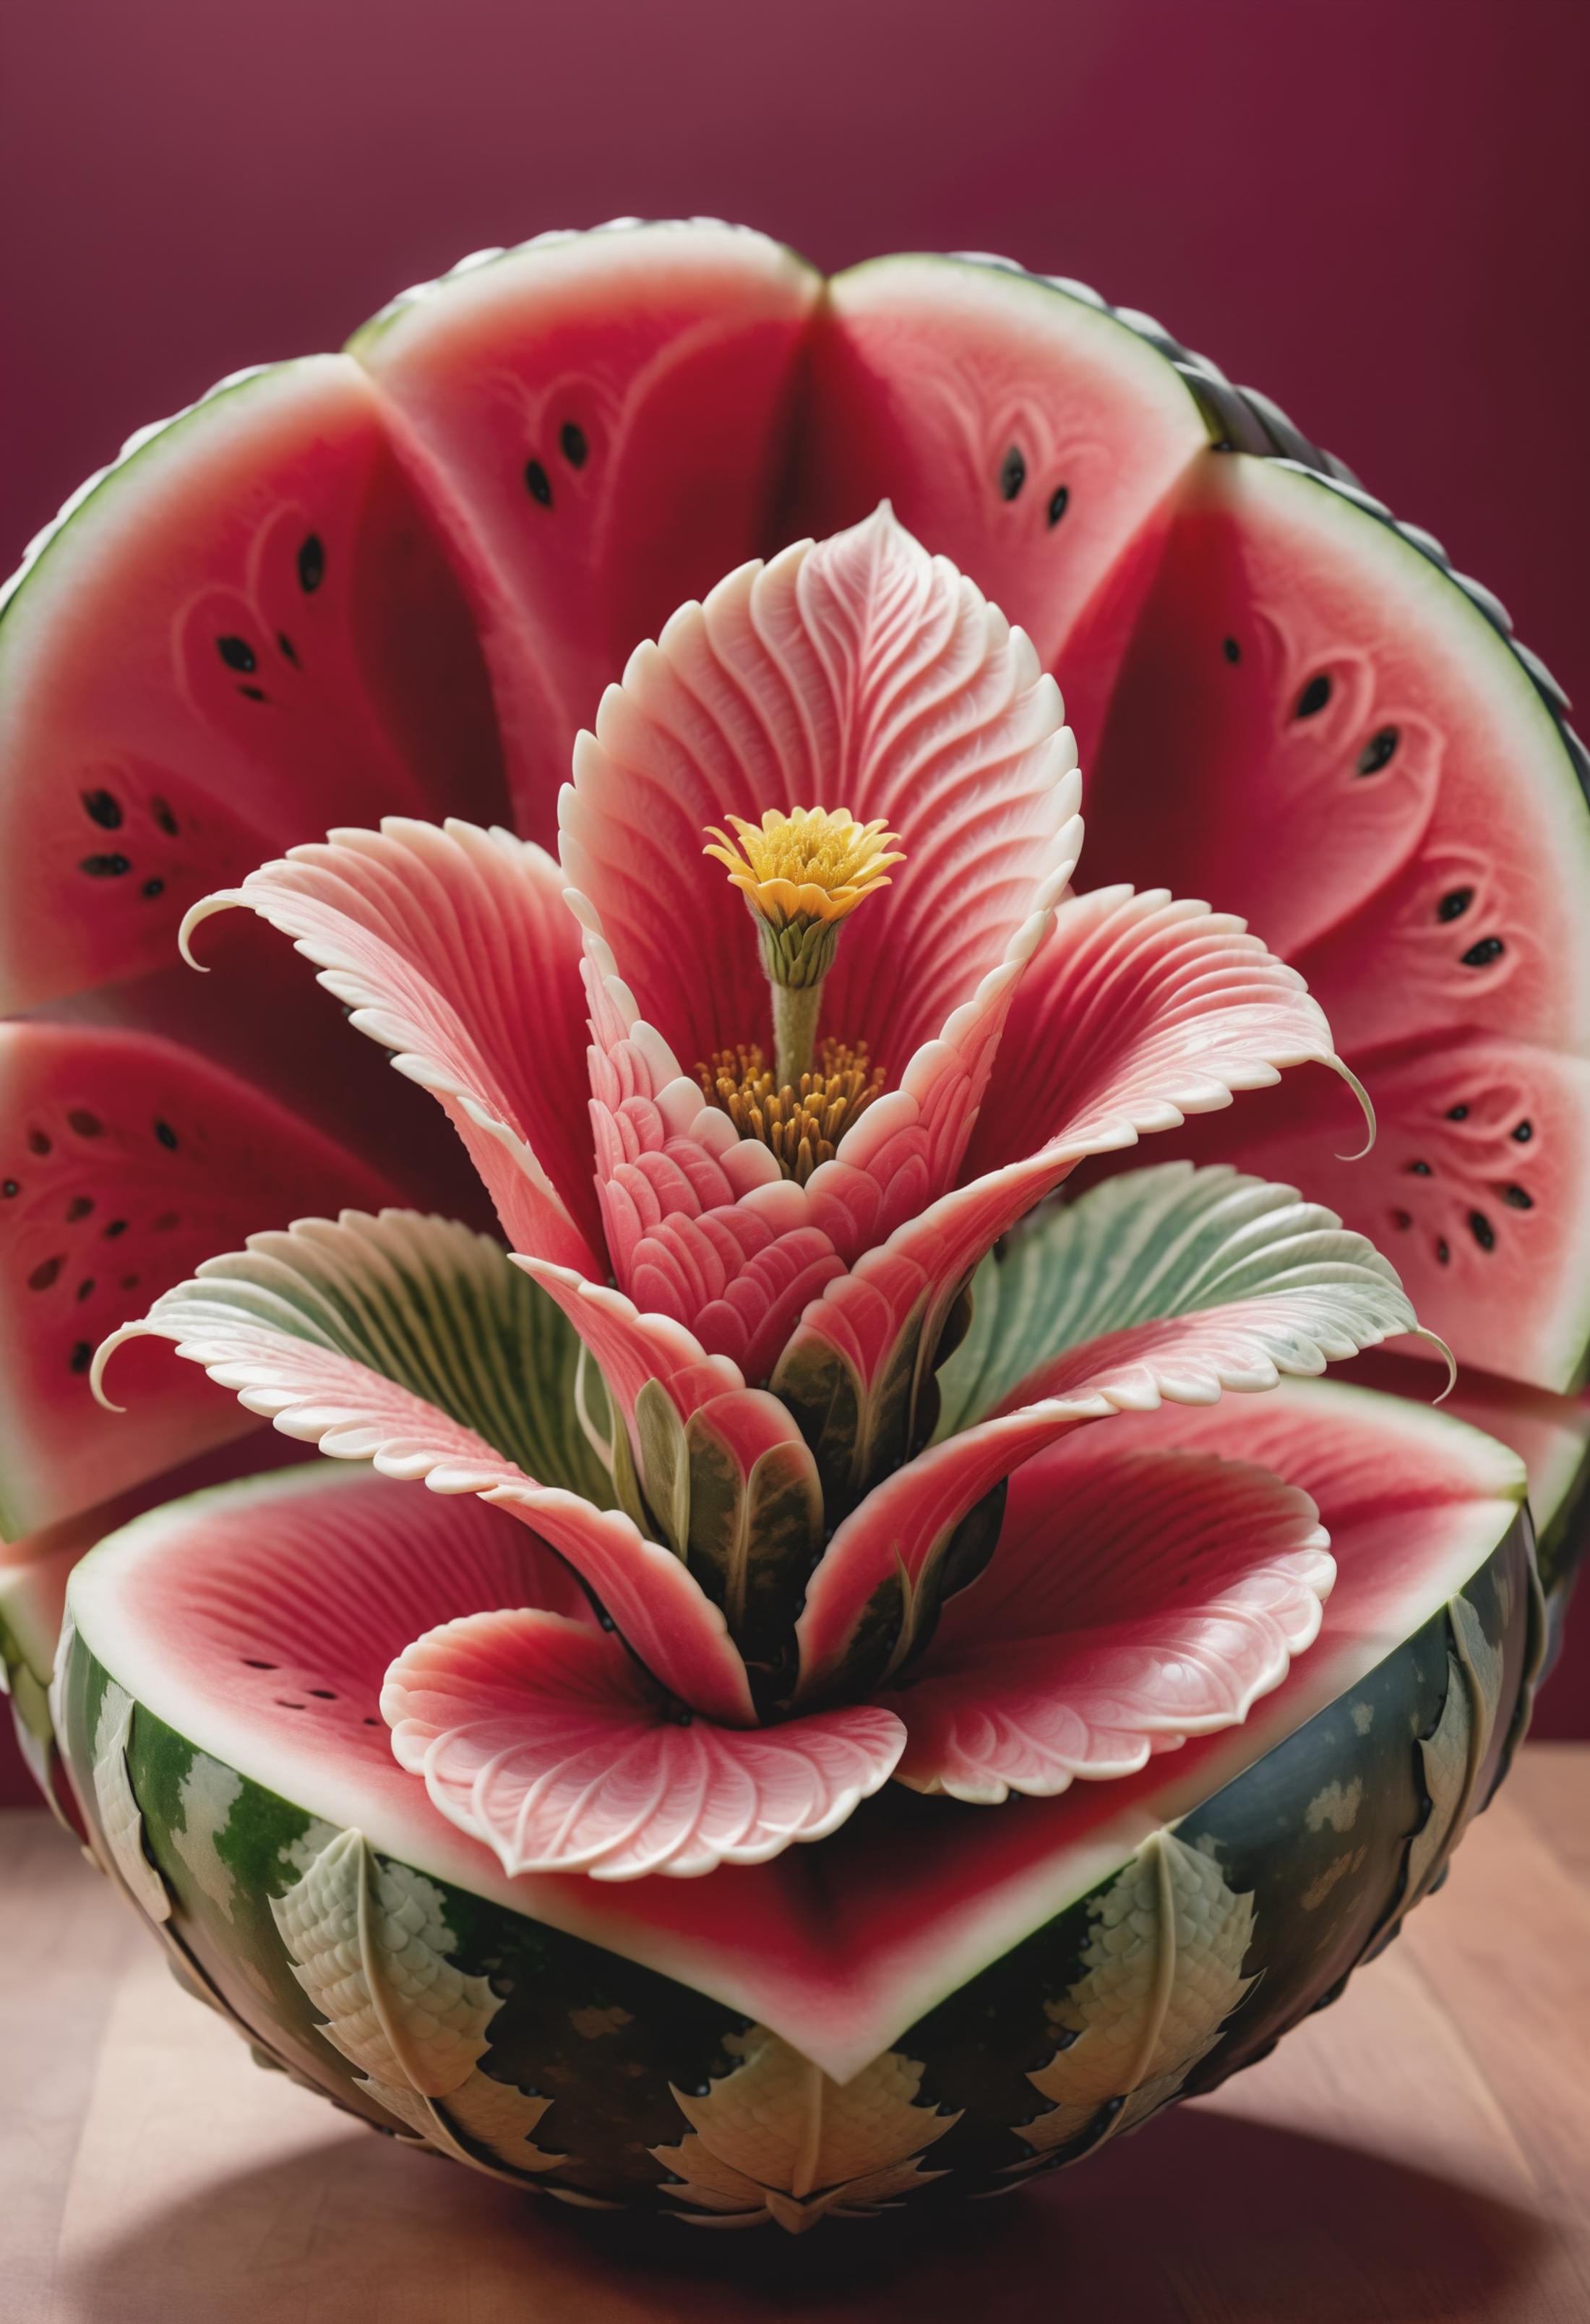 Artistic Watermelon Sculpture with Flower and Butterfly Design